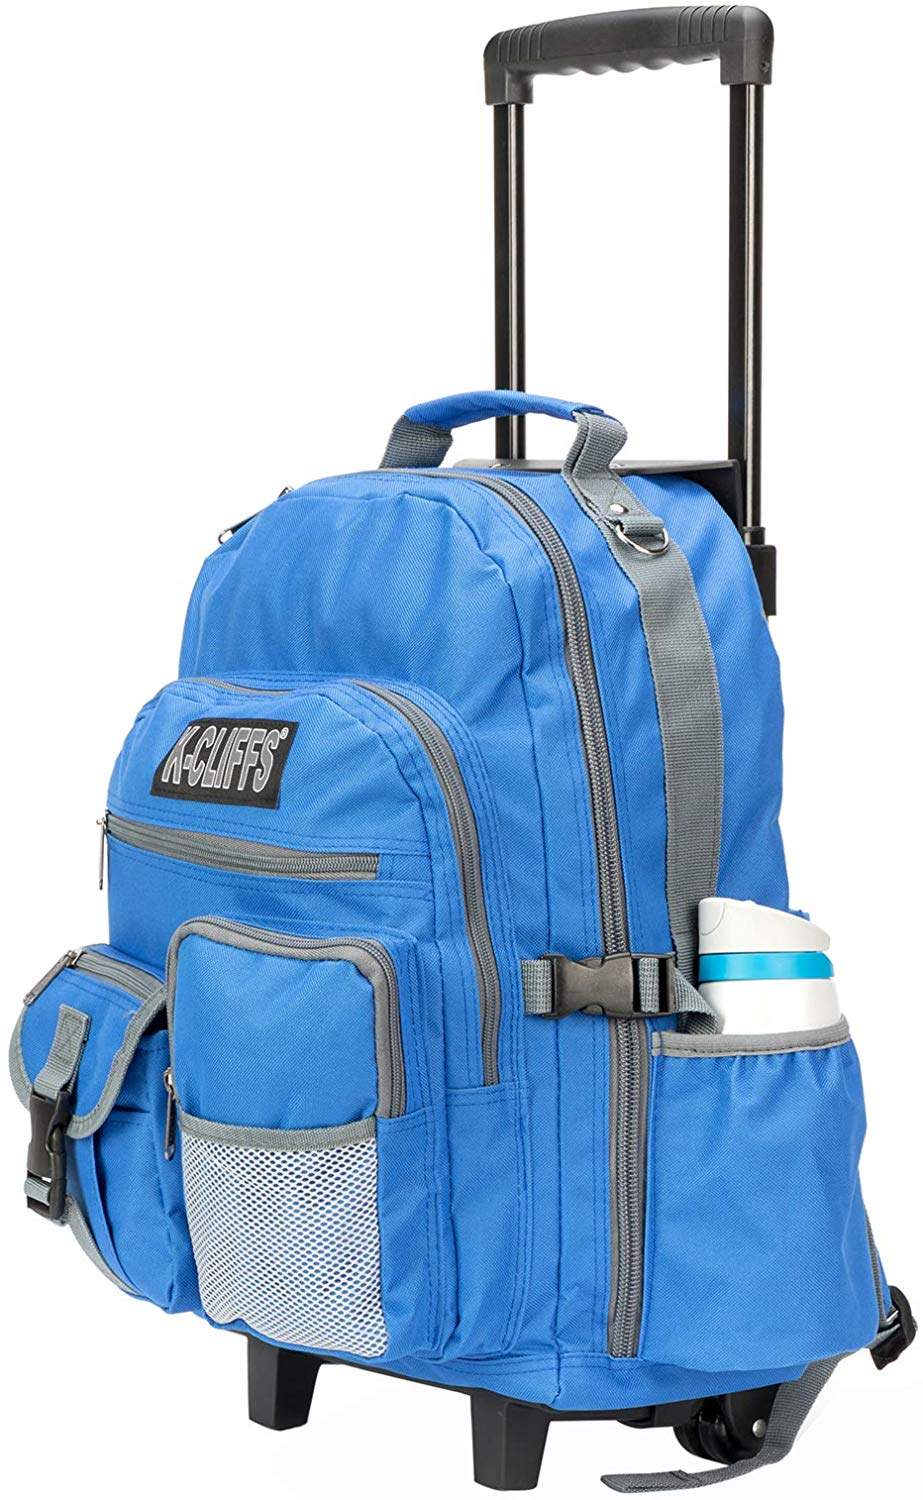 K-Cliffs Rolling Heavy Duty School Backpack with Wheels  Daypack multiple Pockets Royal - image 2 of 10